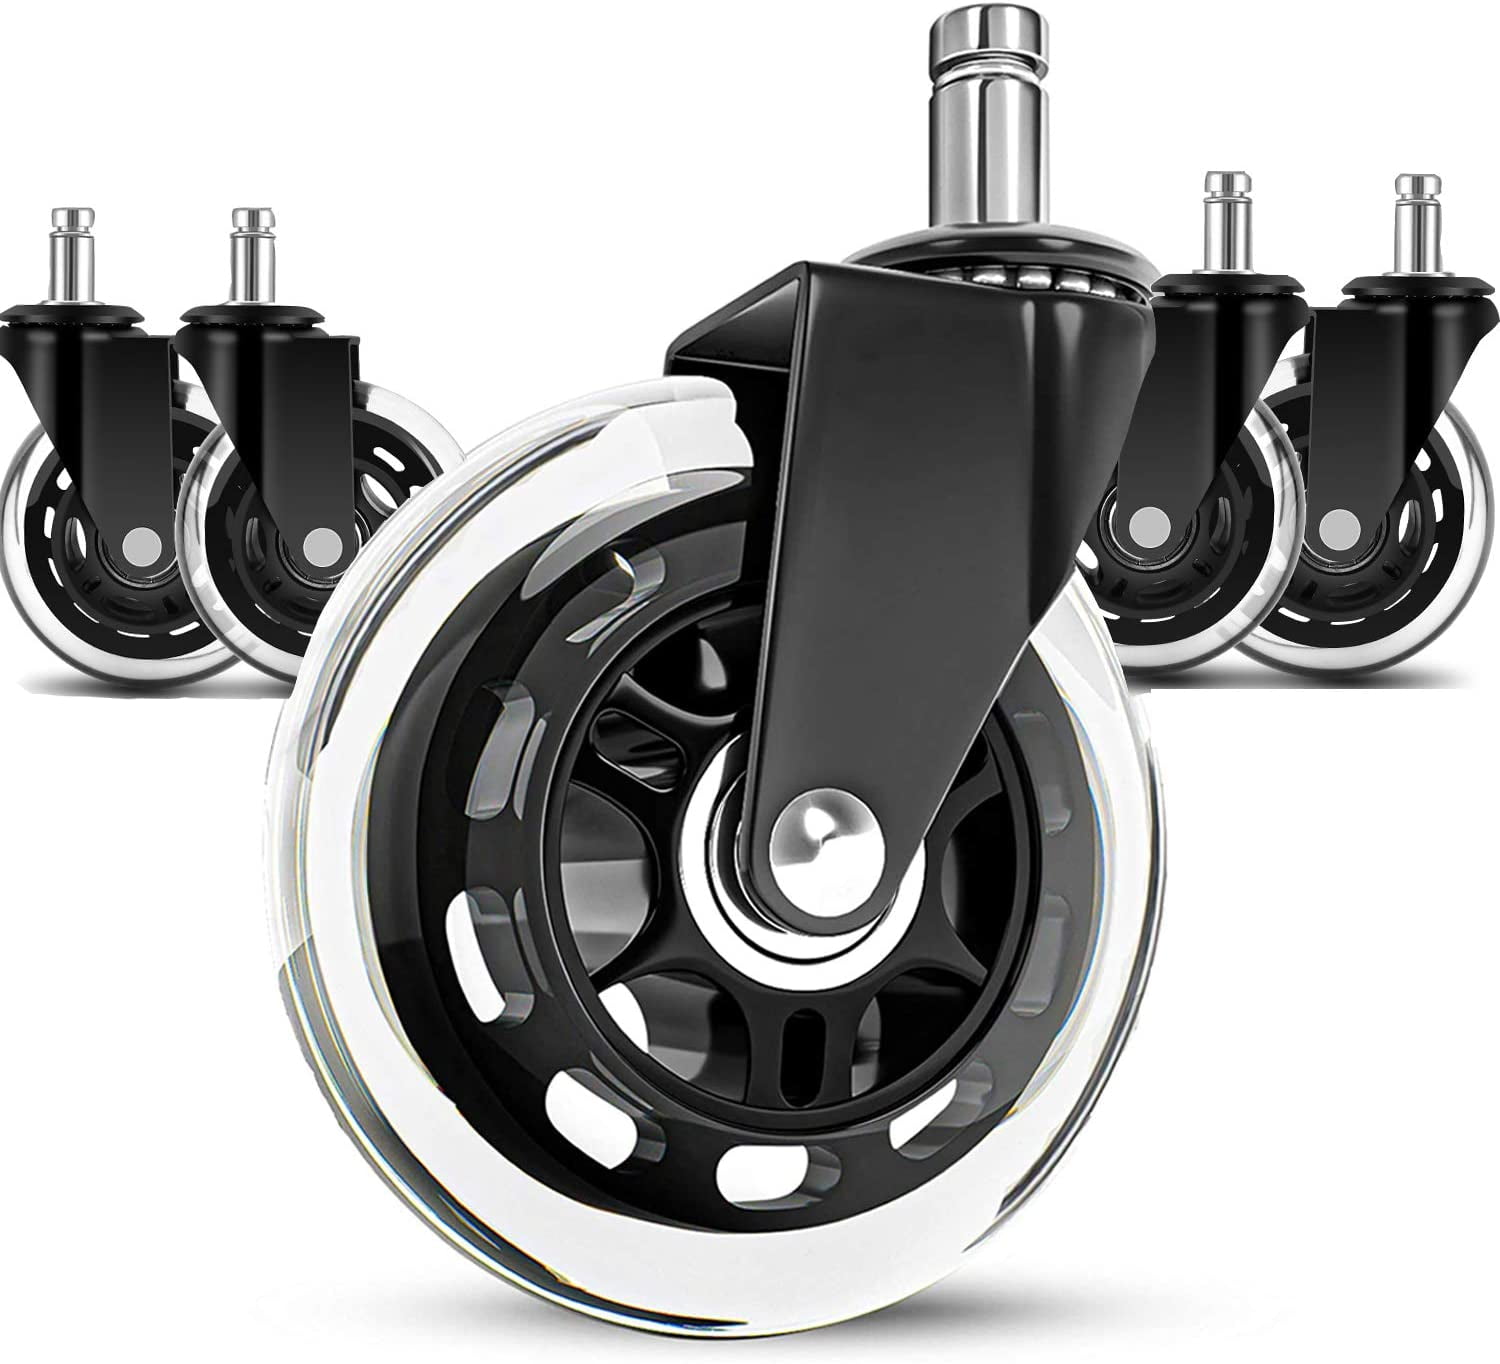 LPHY Office Chair Caster Wheels (Set of 5) - 3'' Smooth Rolling Heavy ...